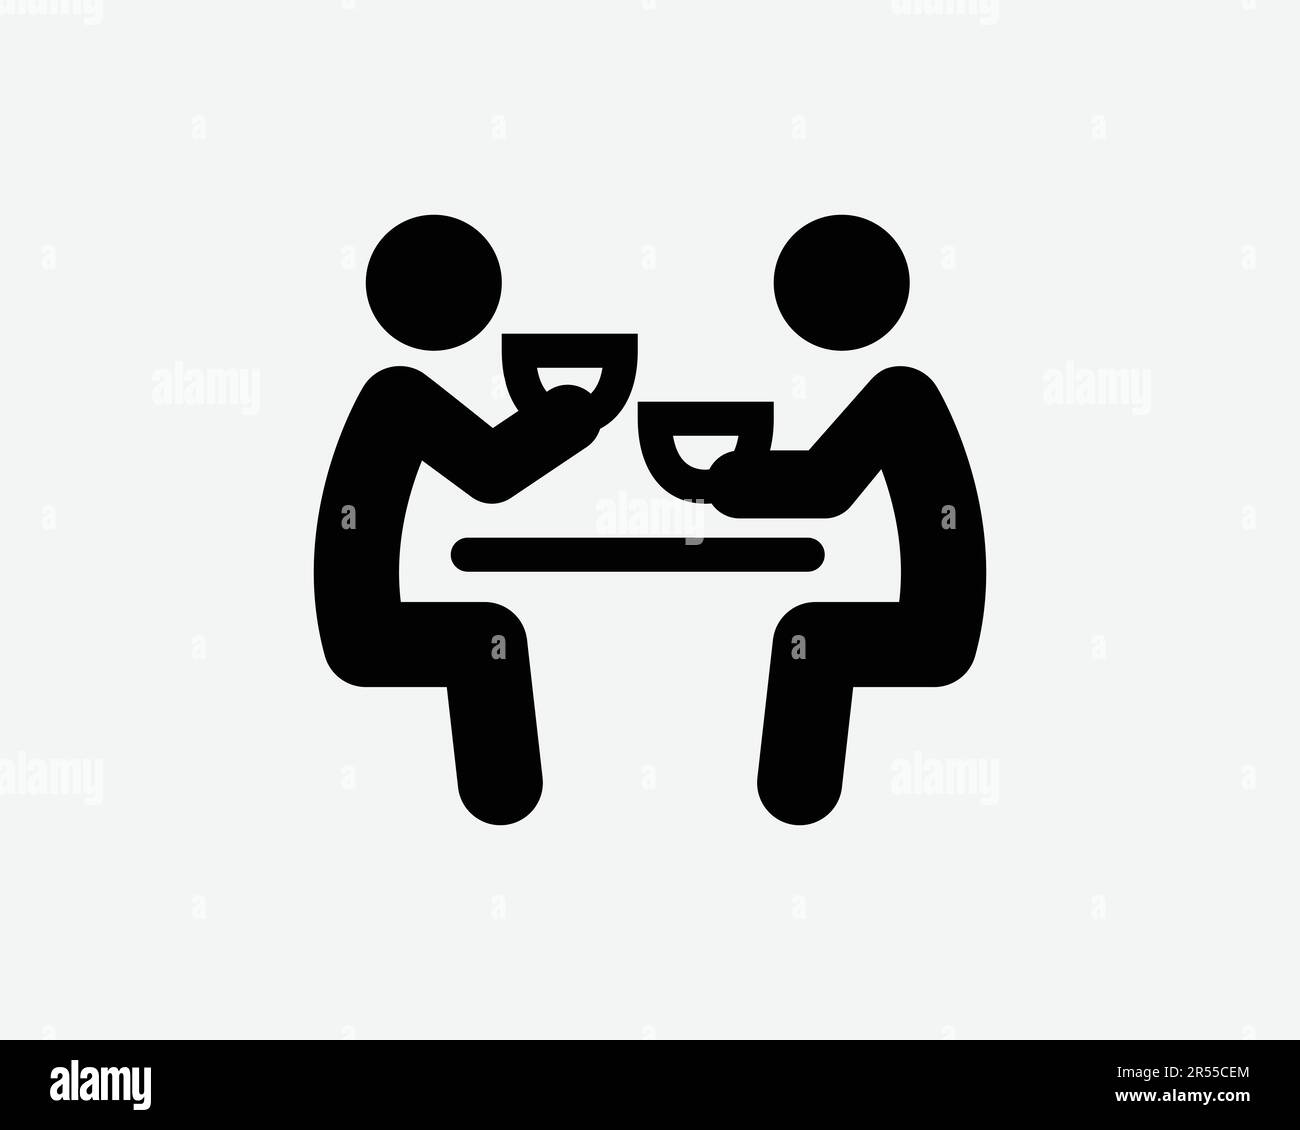 Meeting Over Coffee Icon Eatery Meet Appointment Talking Friends Hang Out Drink Cafe Sign Symbol Black Artwork Graphic Illustration Clipart EPS Vector Stock Vector